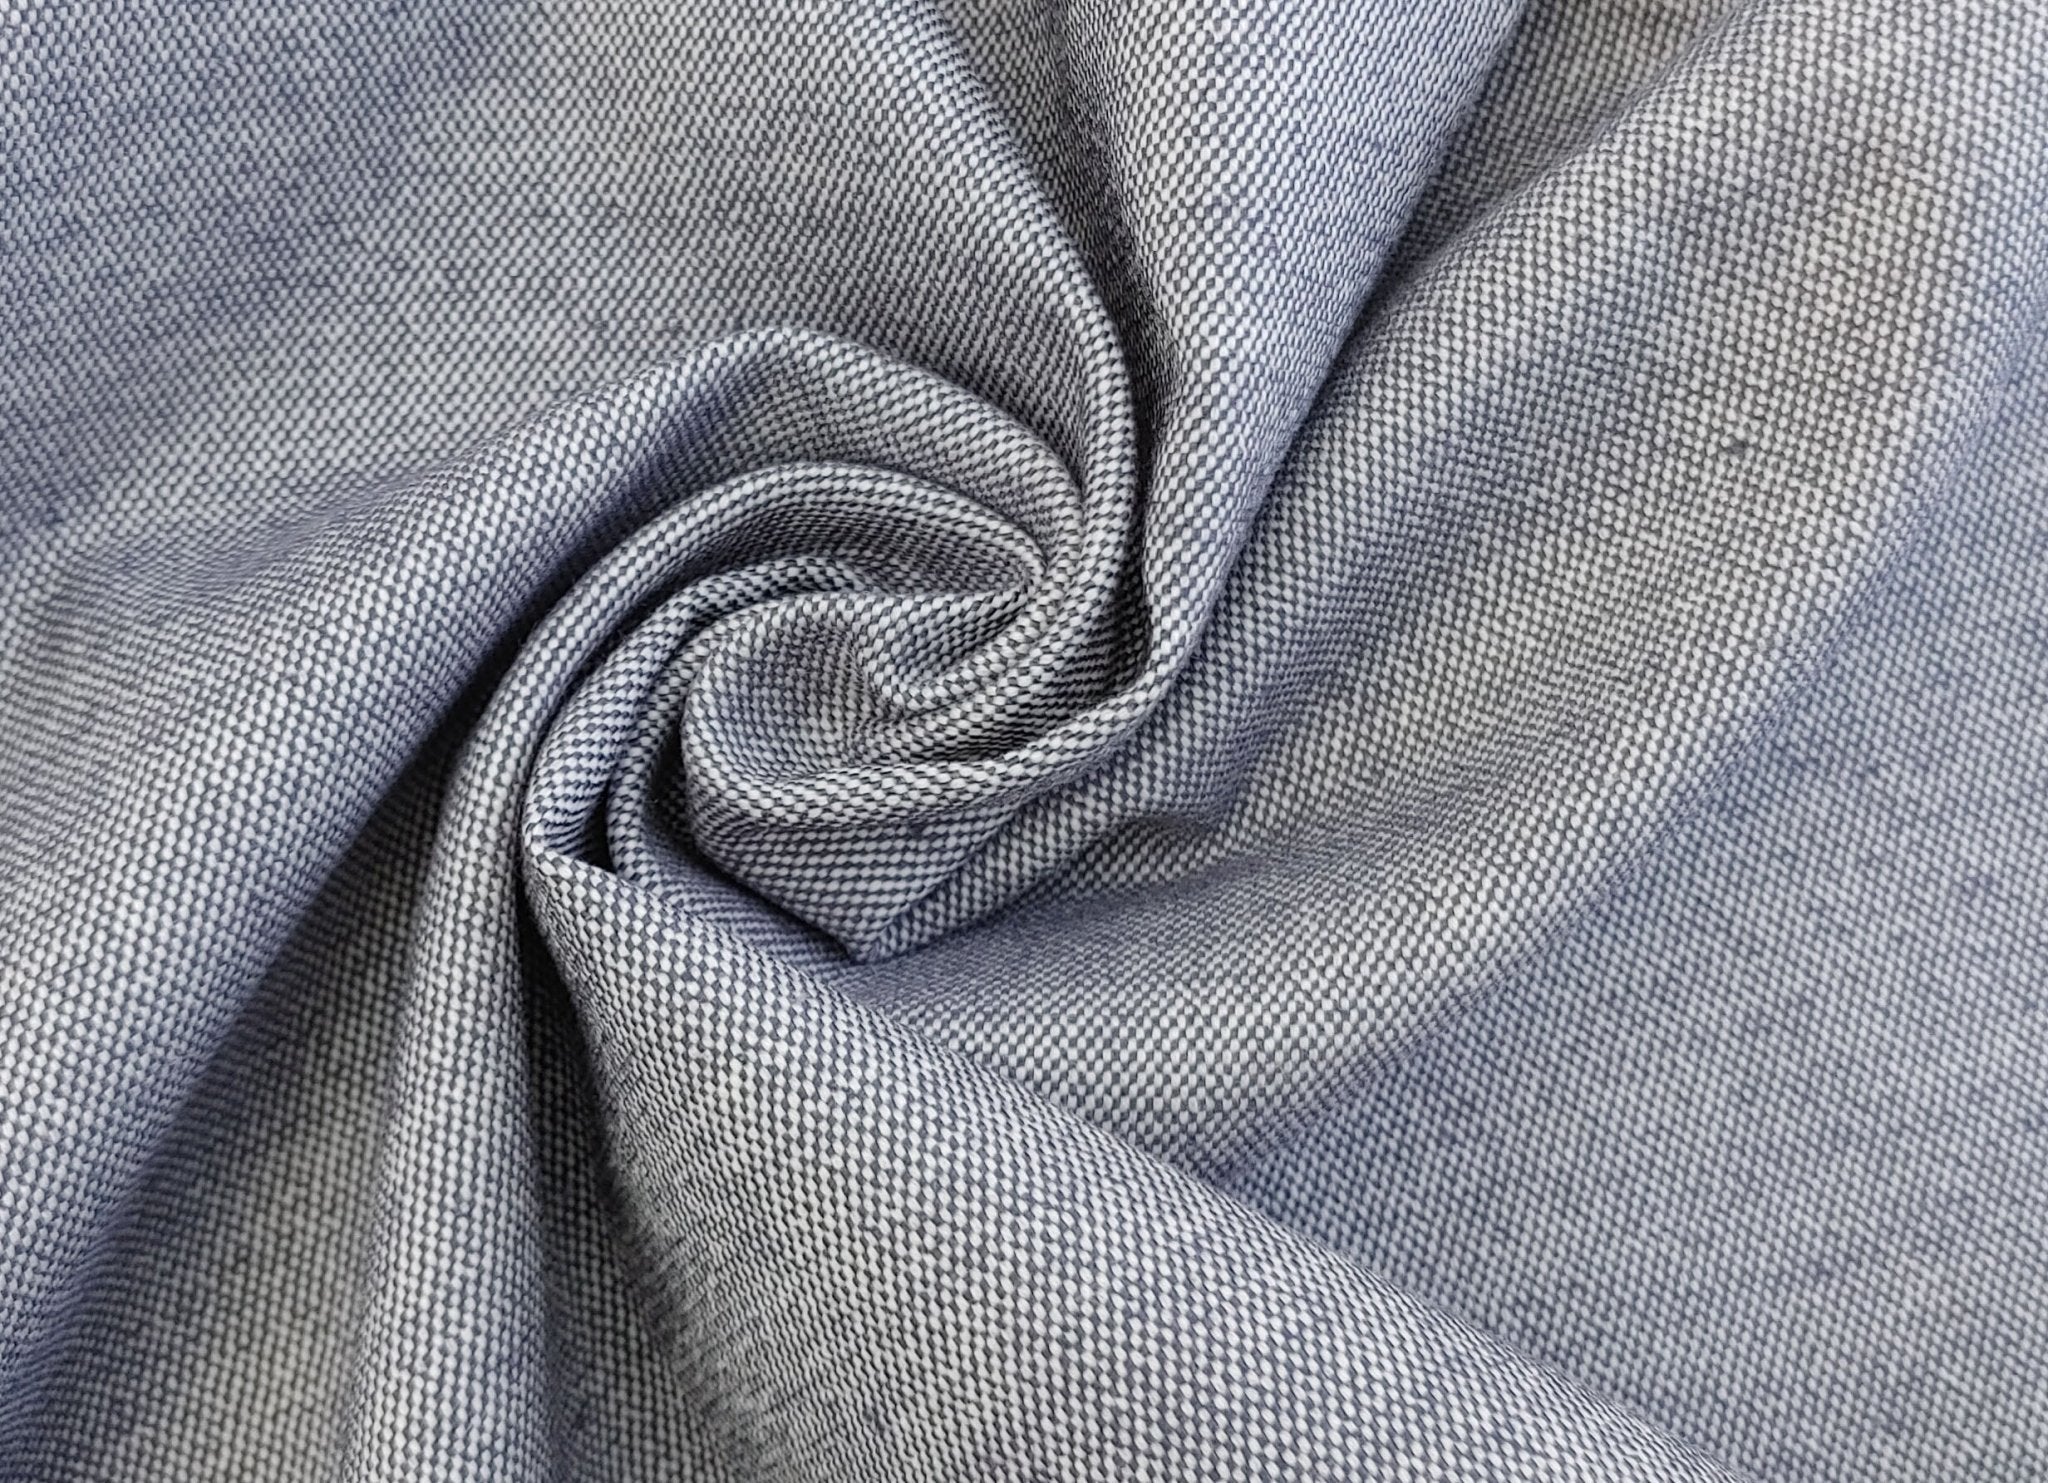 Heavyweight Canvas Chambray Linen Stretch Fabric 3252 - The Linen Lab - Grey